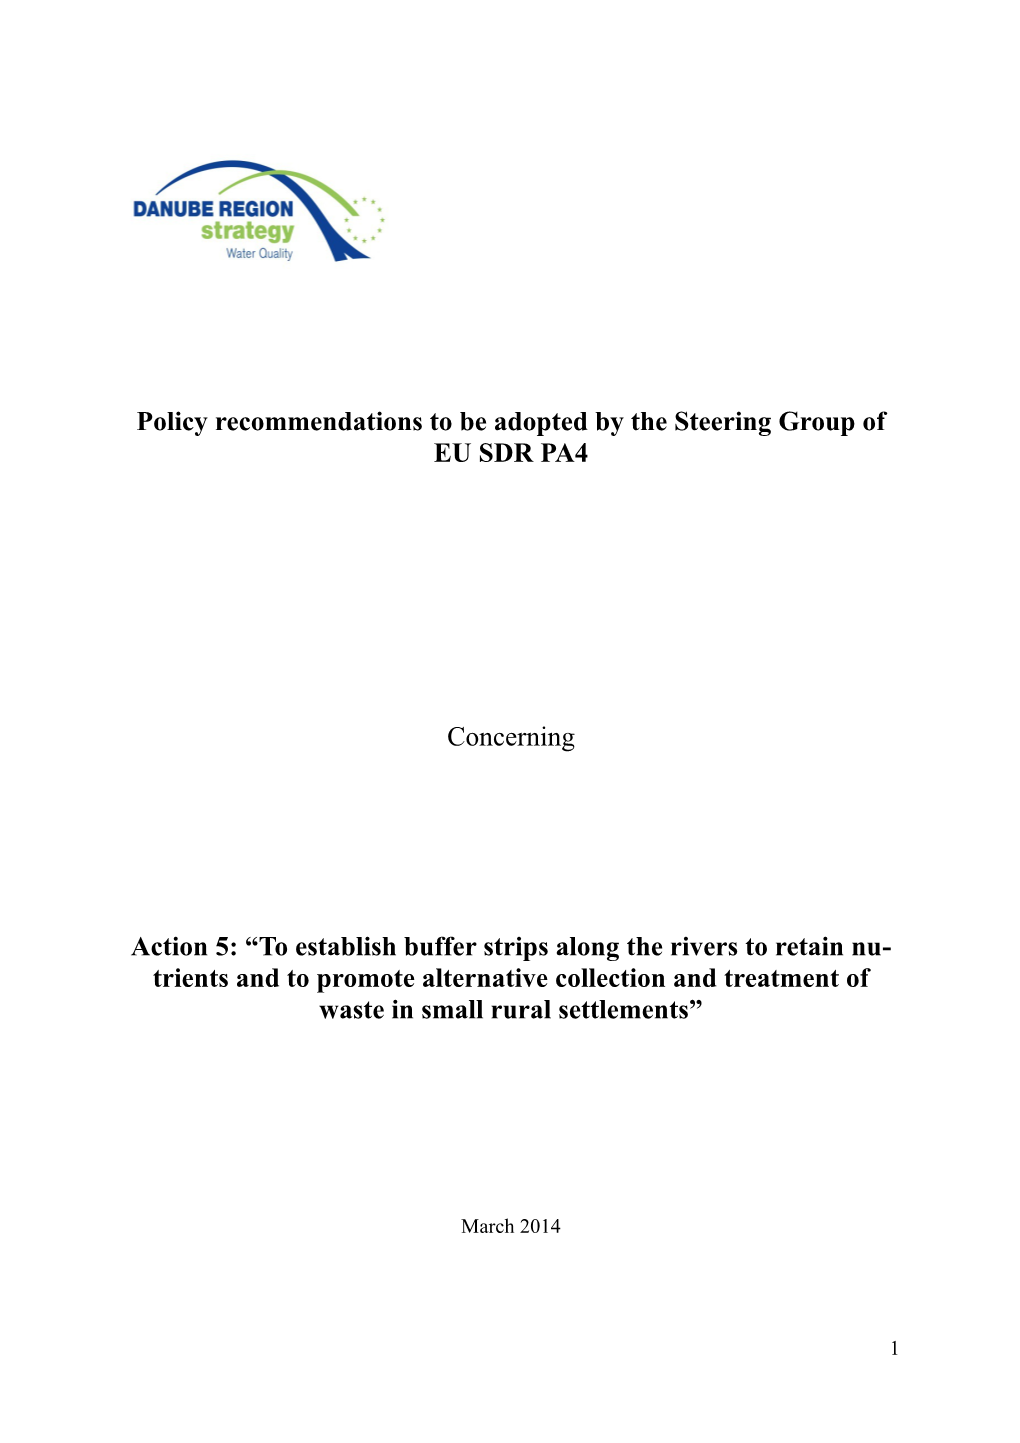 Policy Recommendations to Be Adopted by the Steering Group of EU SDR PA4